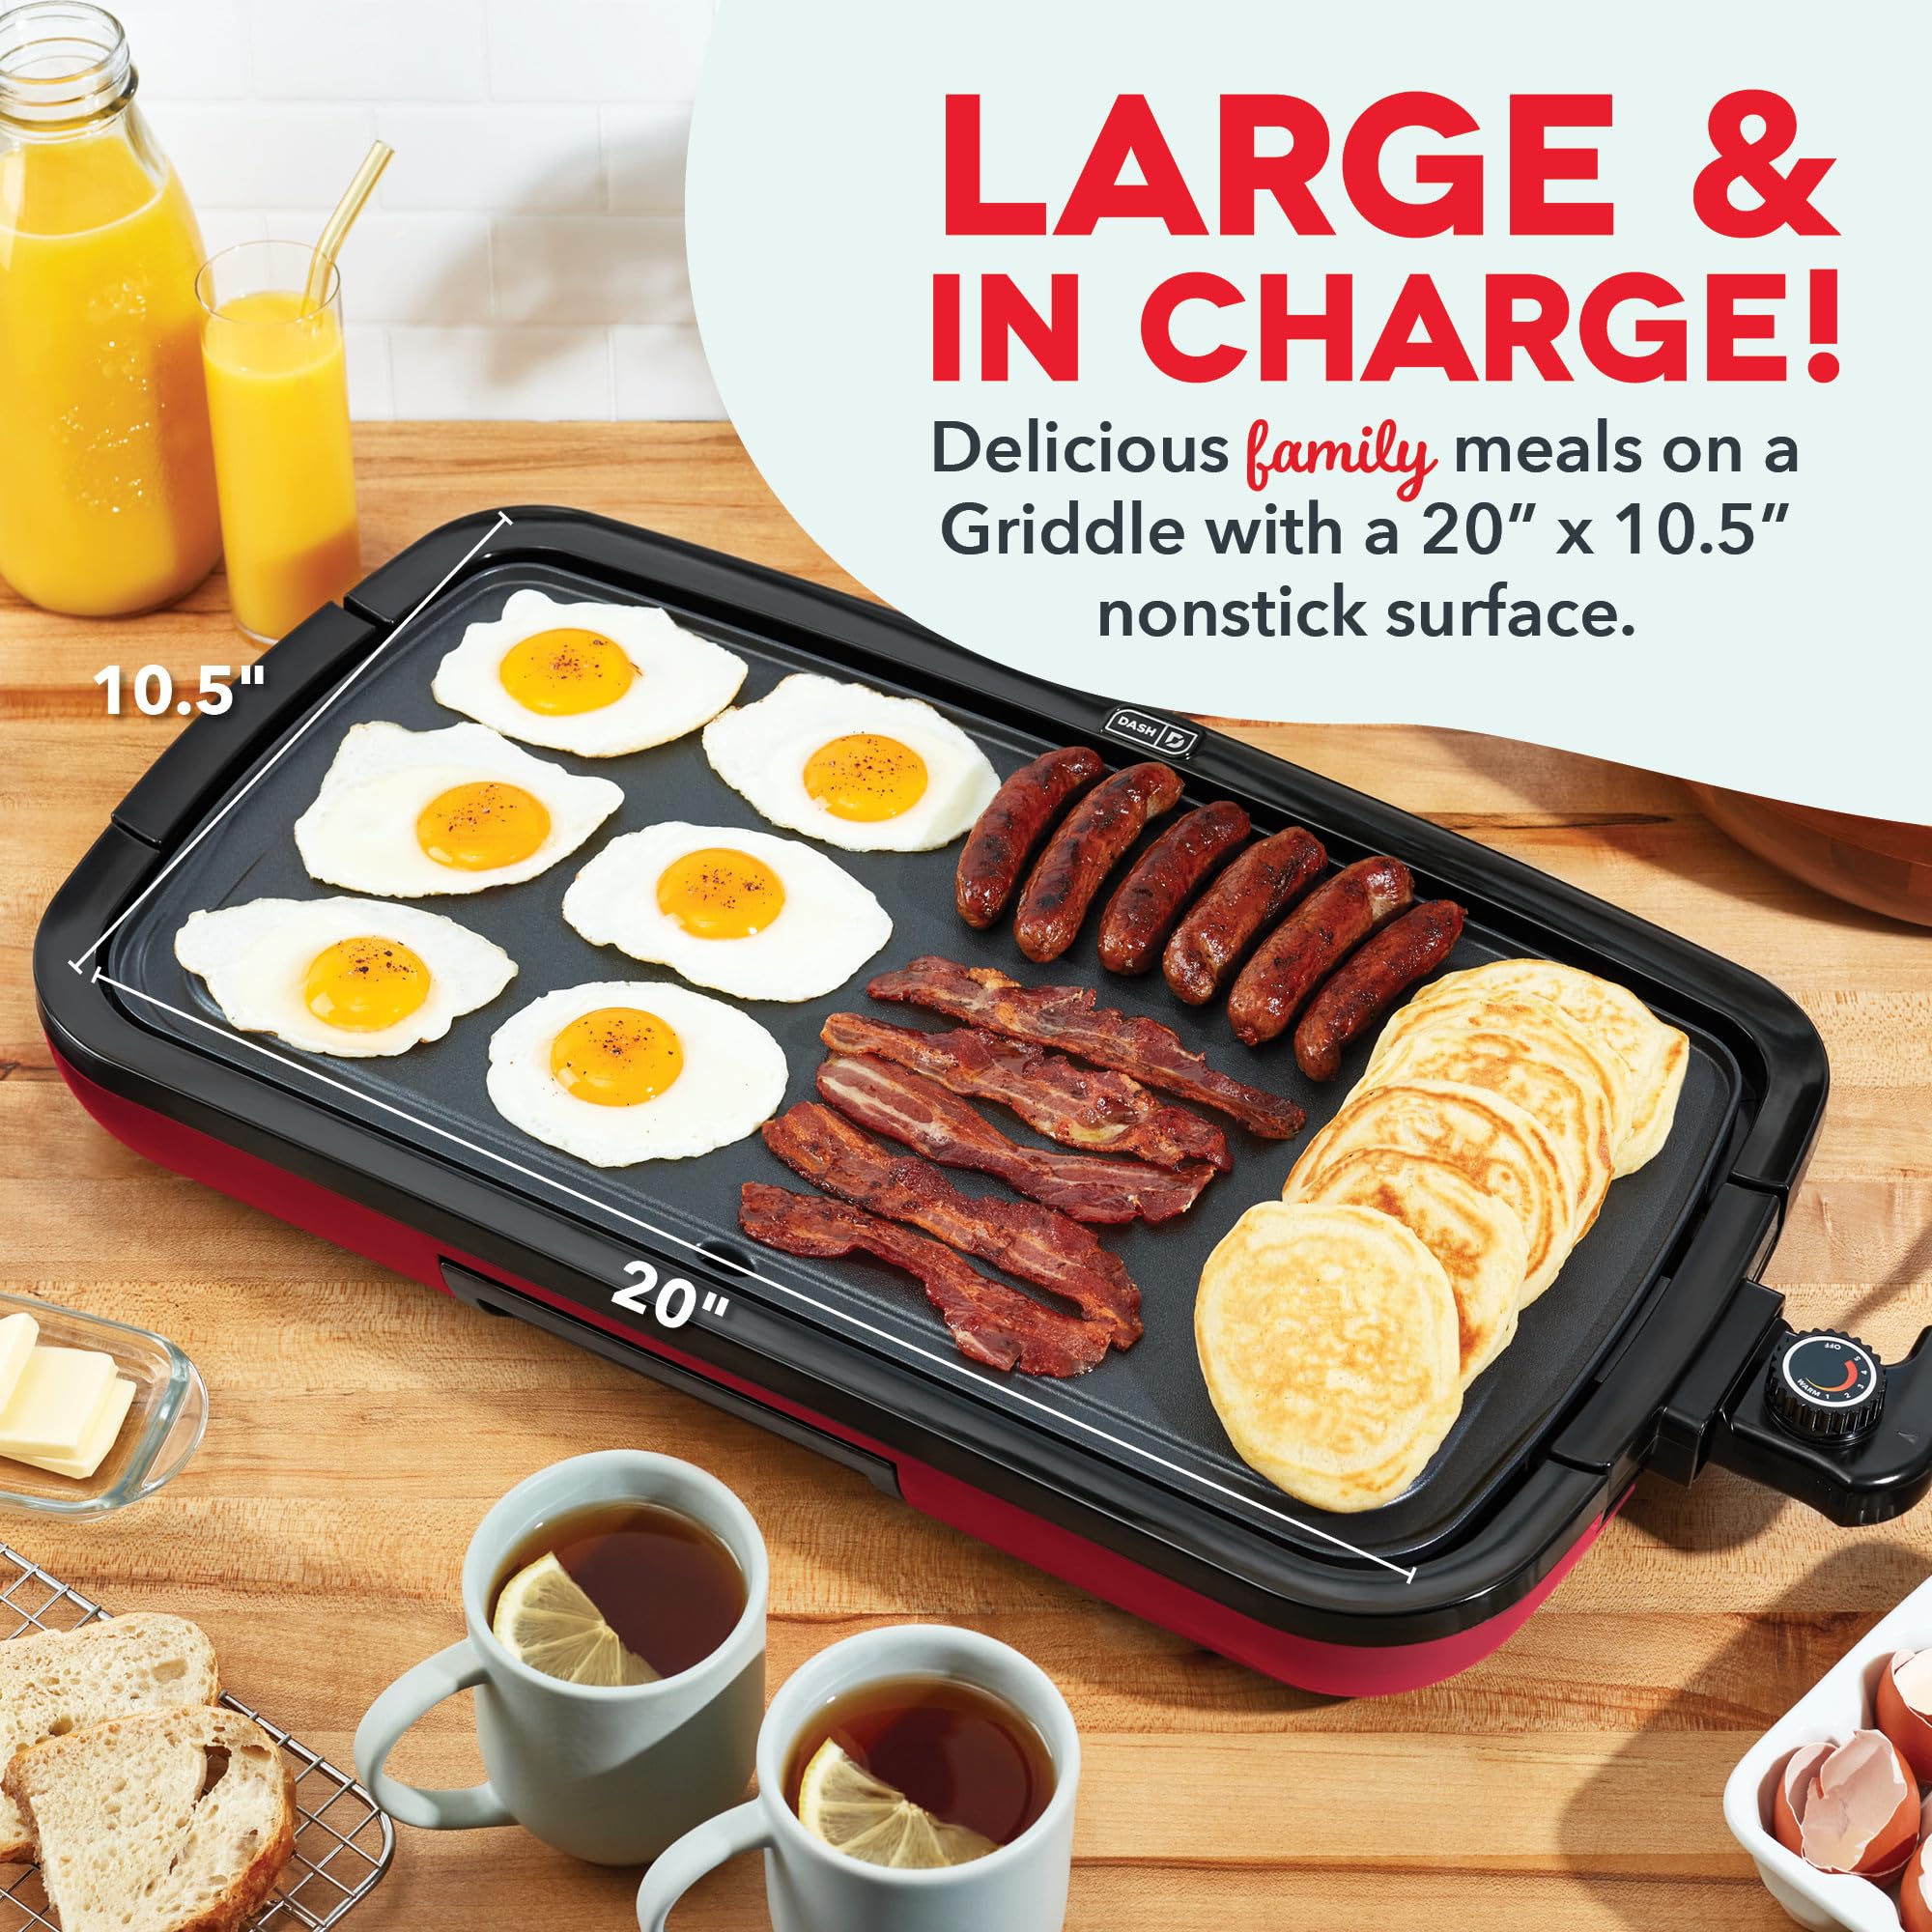 DASH Deluxe Everyday Electric Griddle with Dishwasher Safe Removable Nonstick Cooking Plate for Pancakes, Burgers, Eggs and more, Includes Drip Tray + Recipe Book, 20” x 10.5”, 1500-Watt - Red